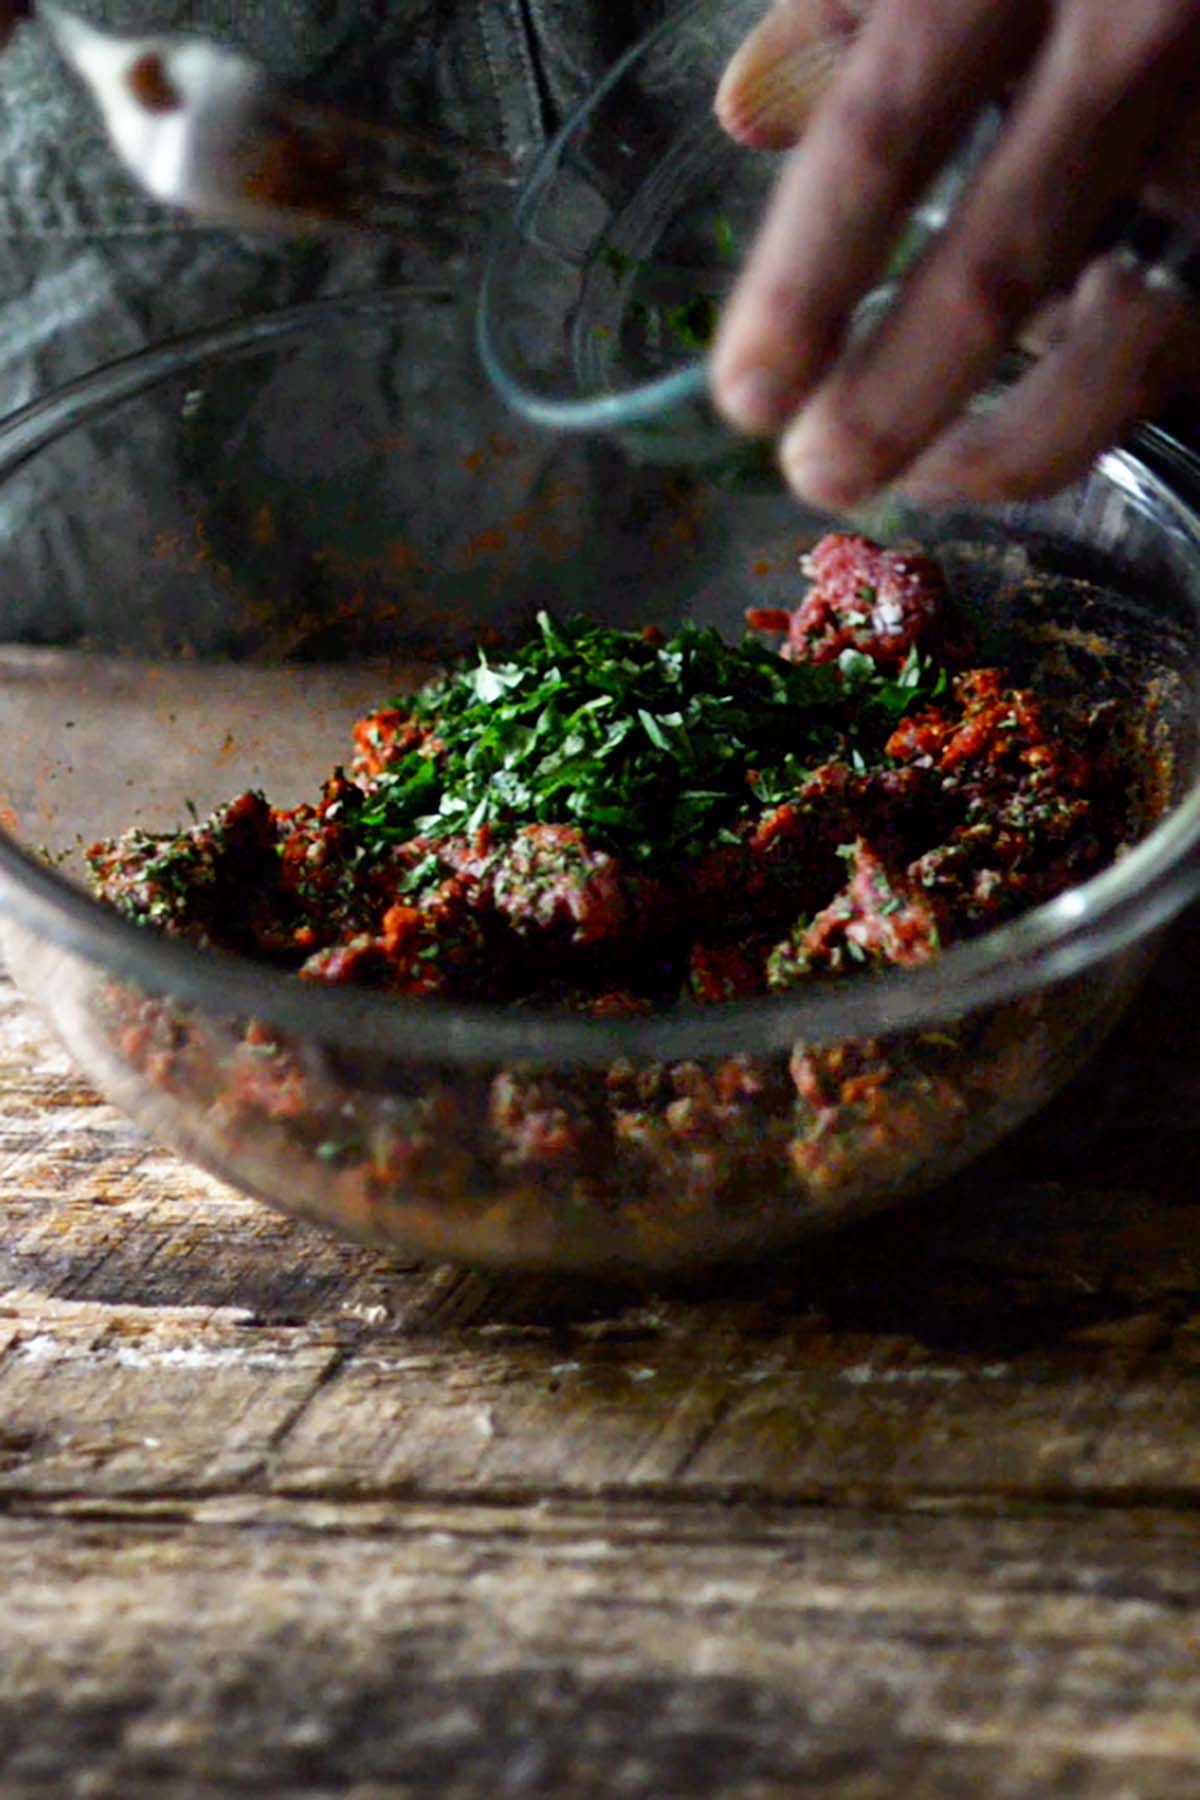 Ground beef, herbs, and spices in a glass mixing bowl.